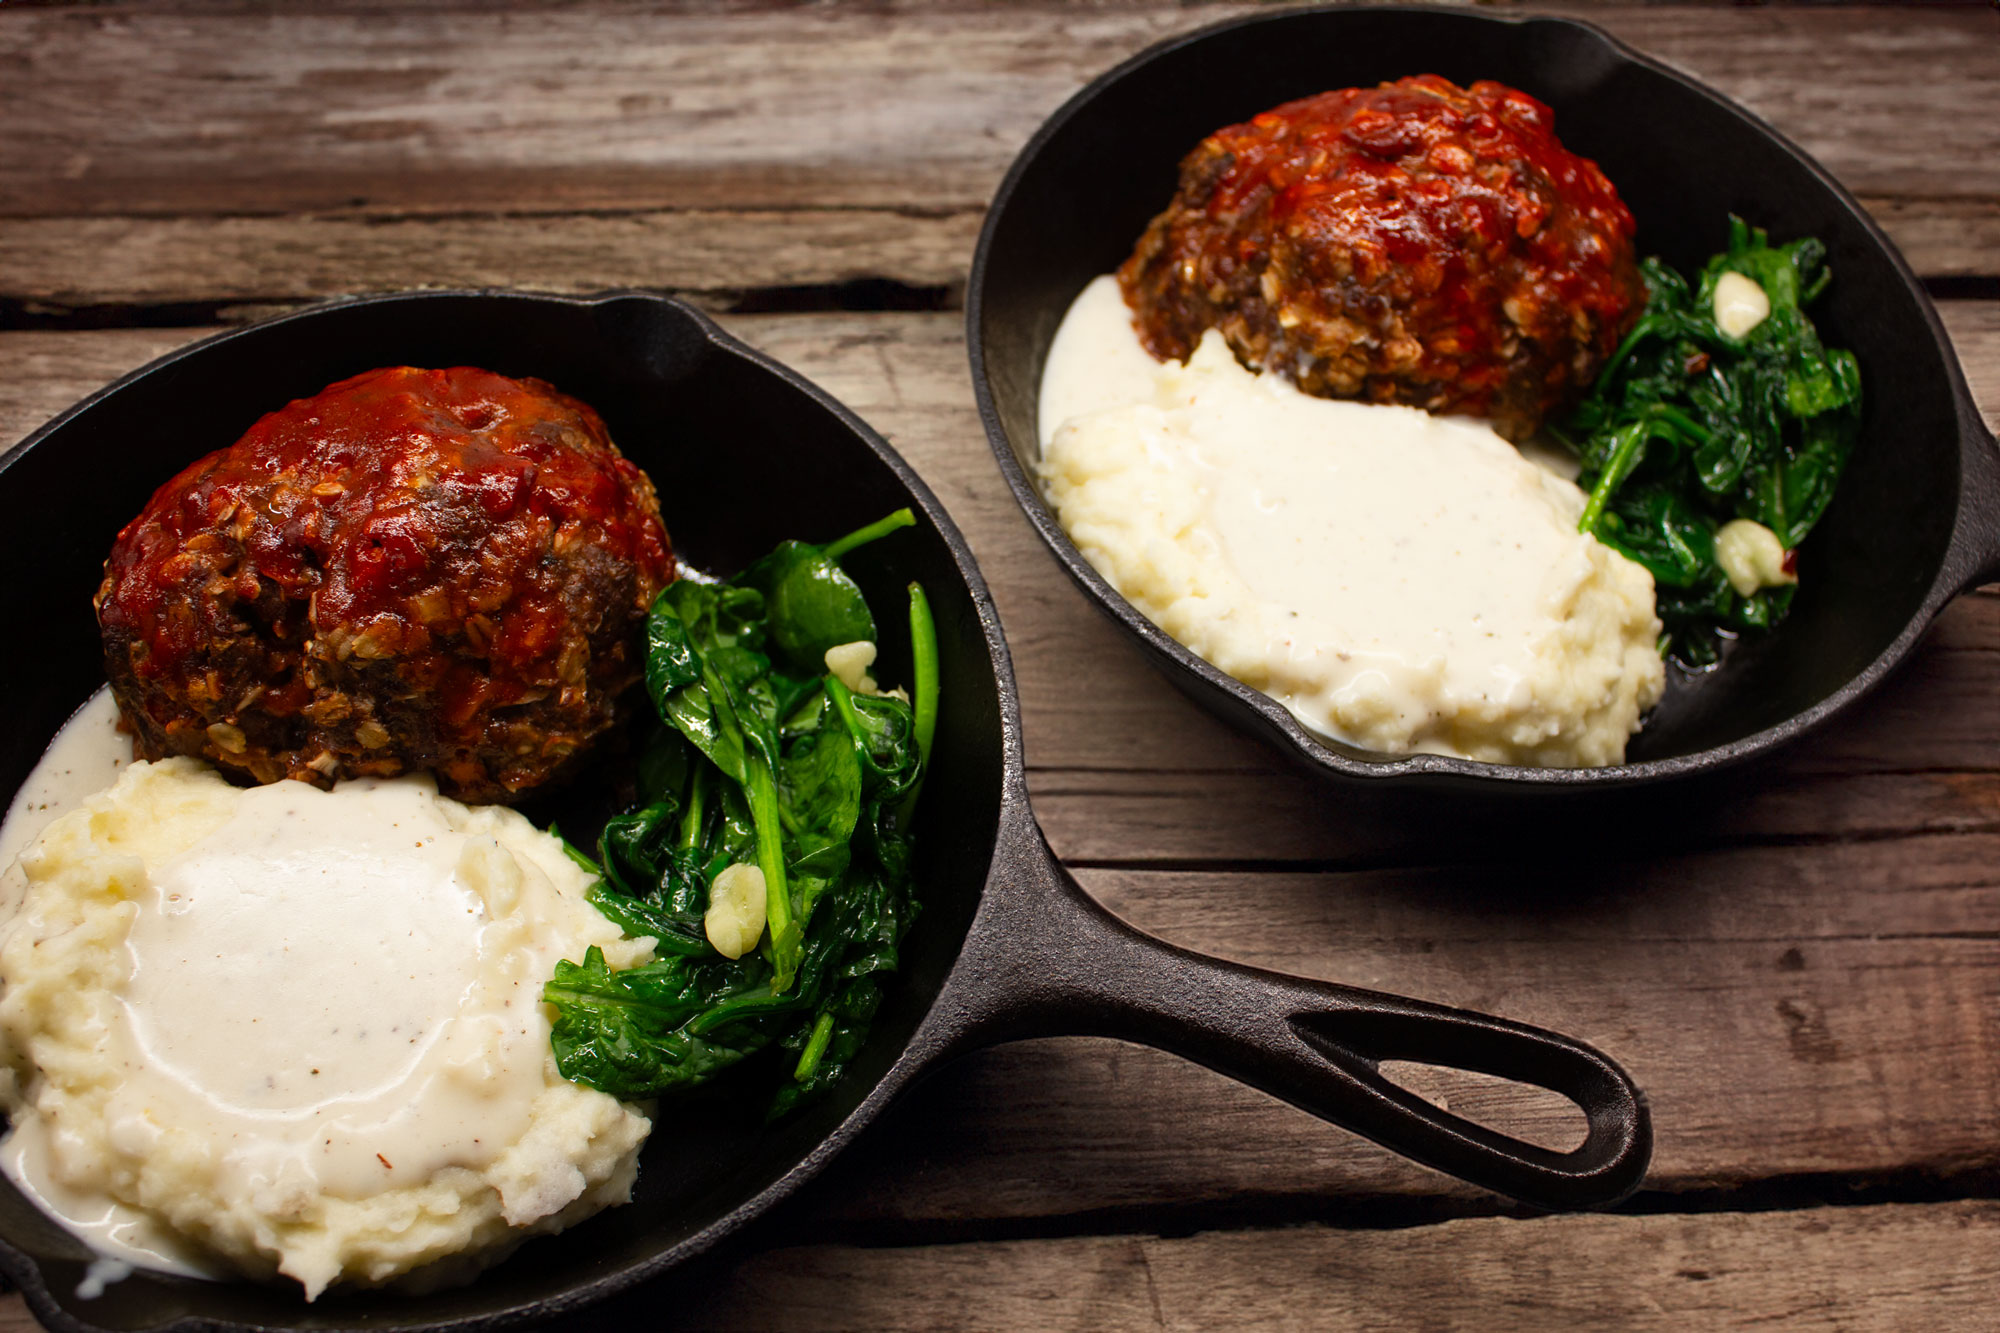 two sperate iron skillets with a meatloaf dinner in each